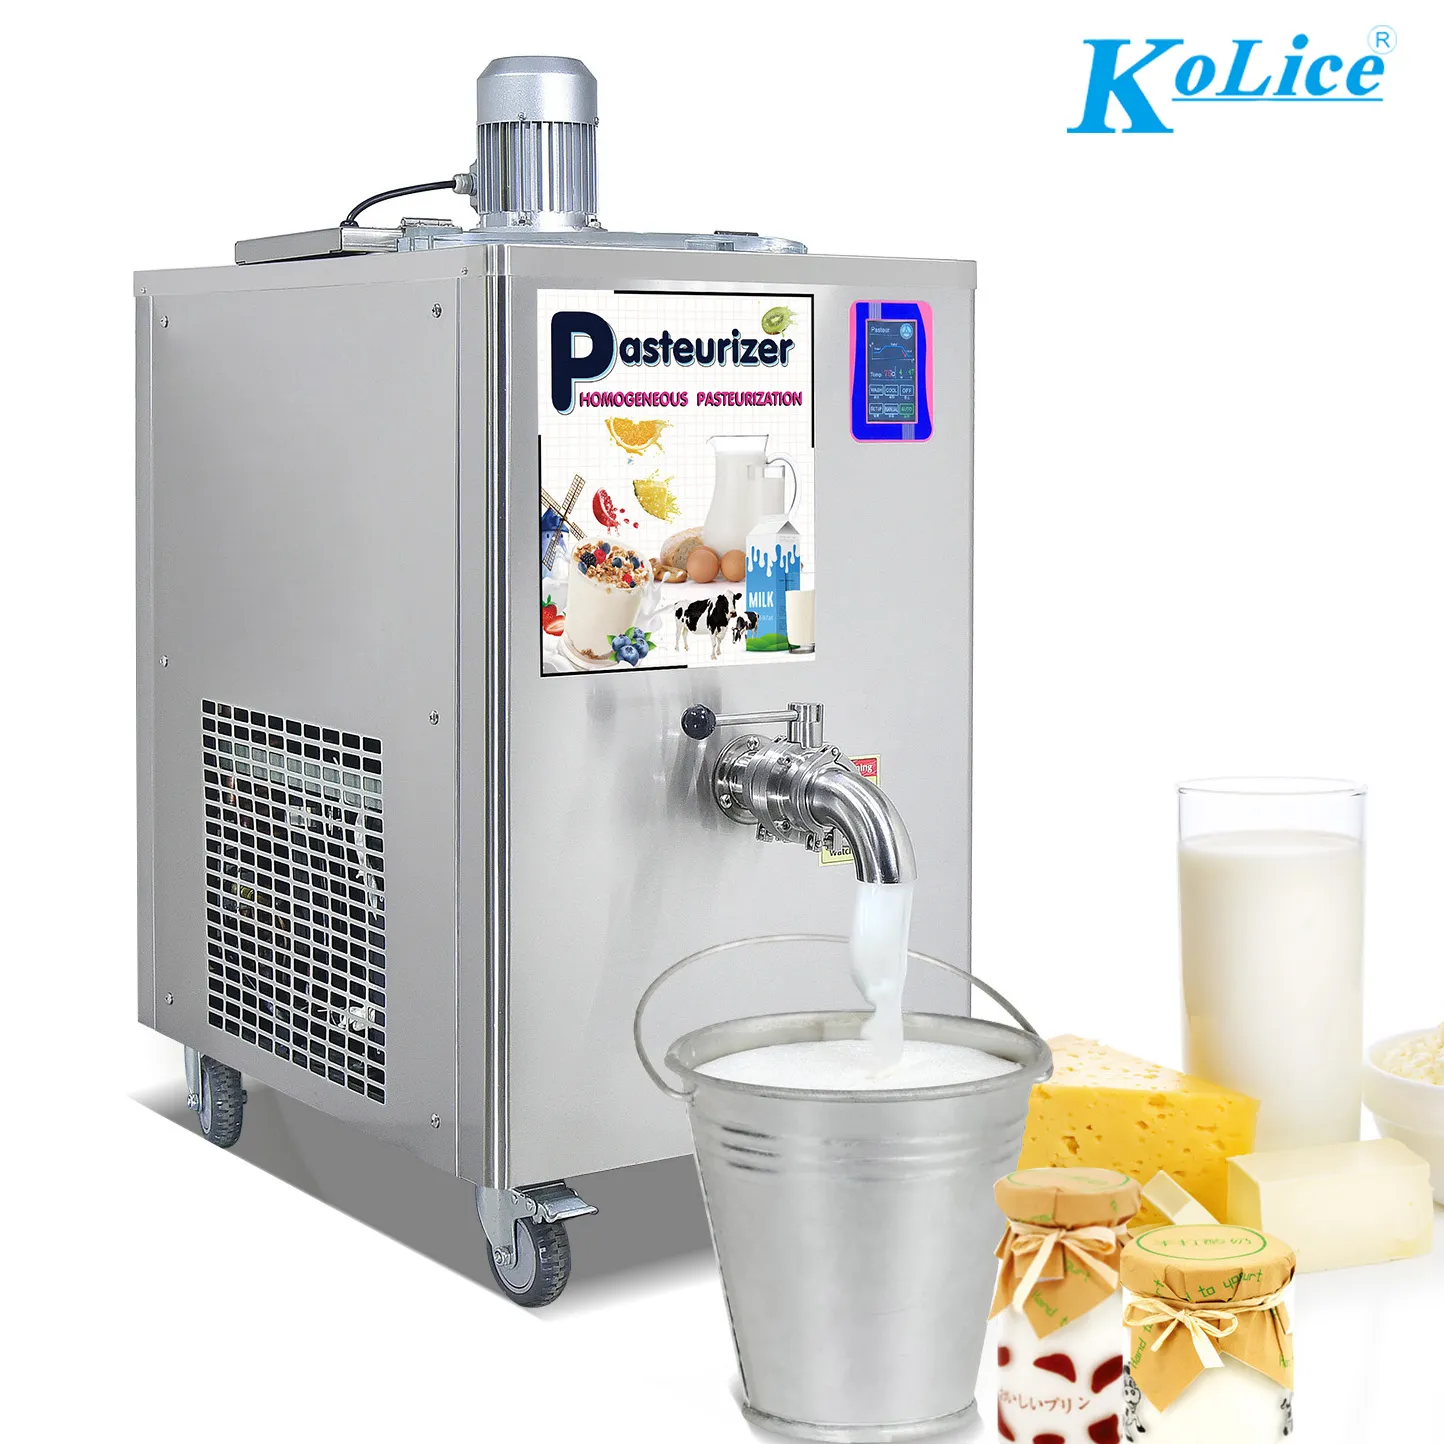 Free shipping to door USA Kolice 36L low and high temperature pasteurization sterilizer rmachine/milk pasteurizer/milksterilization machine with refrigeration